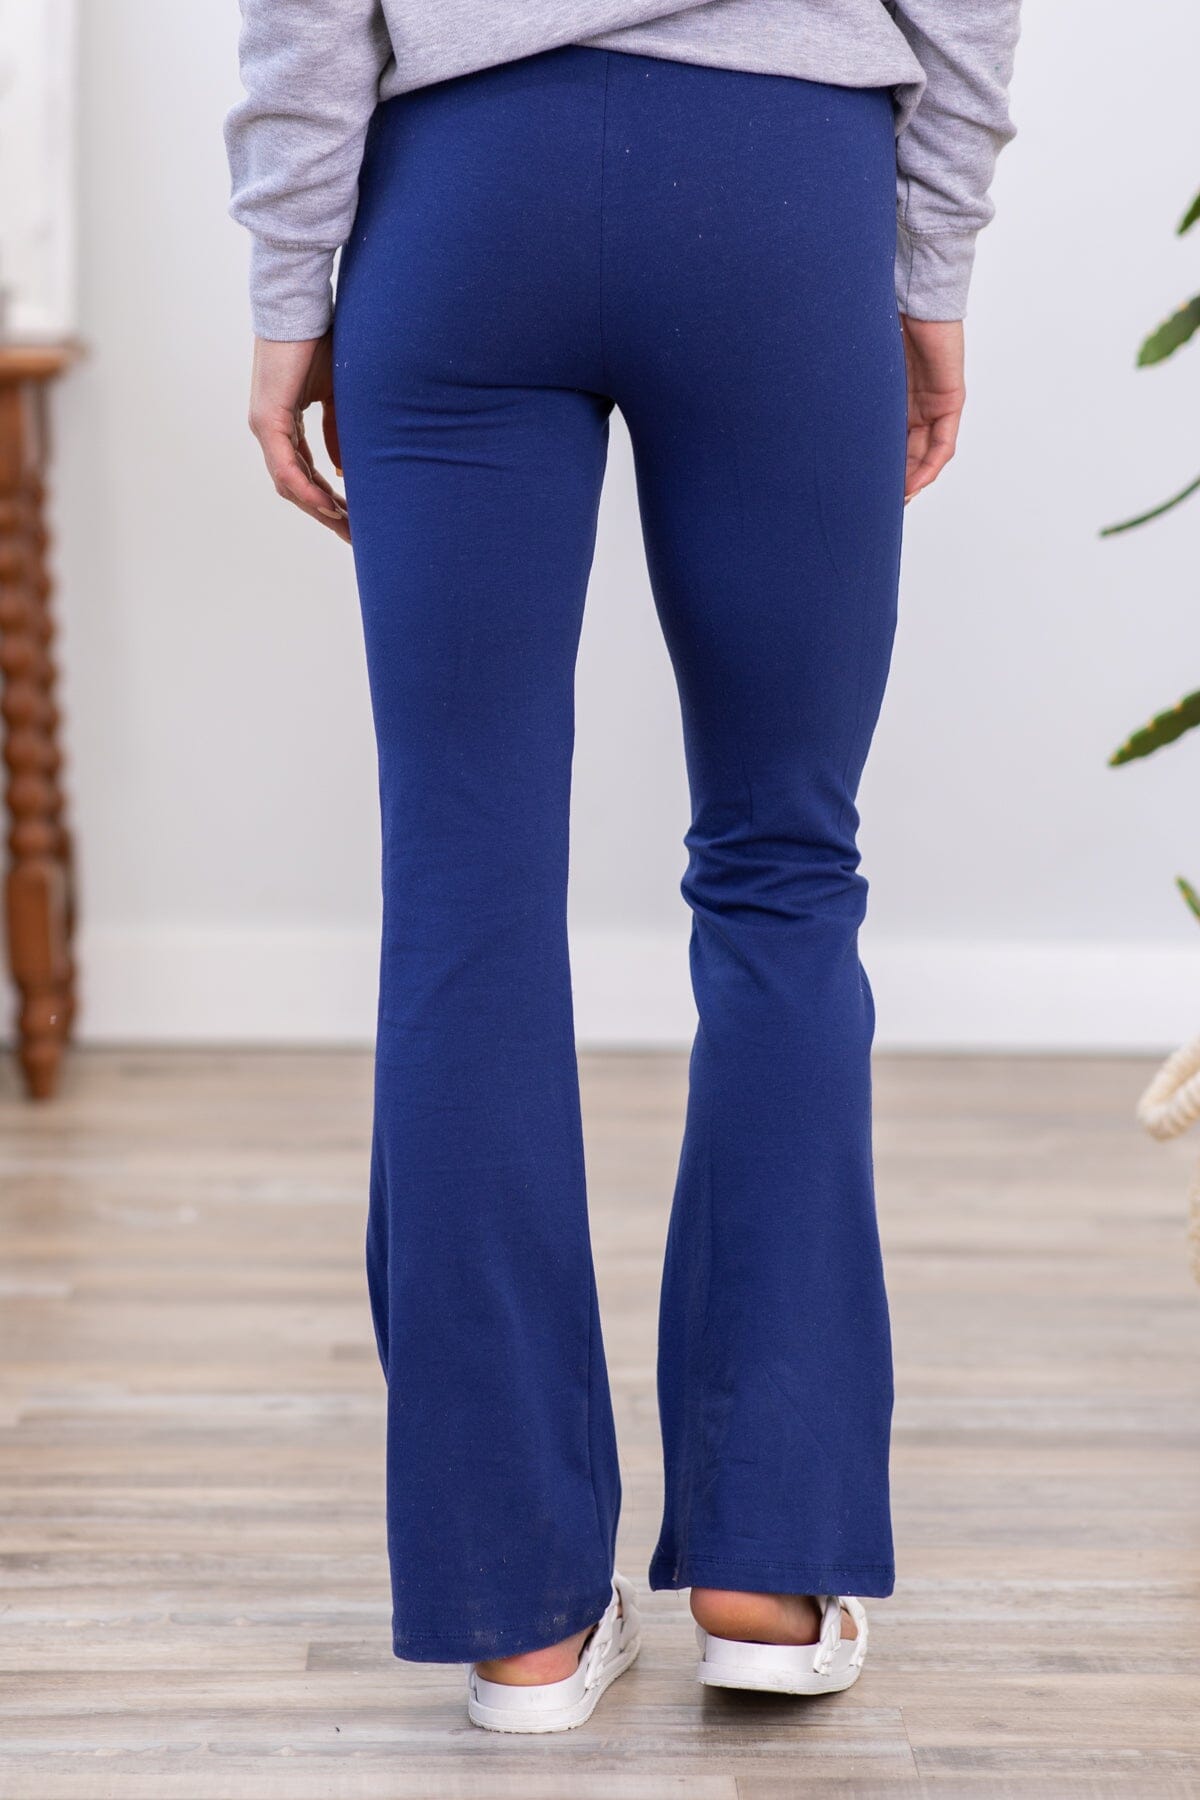 Navy Flare Pull On Yoga Pants - Filly Flair